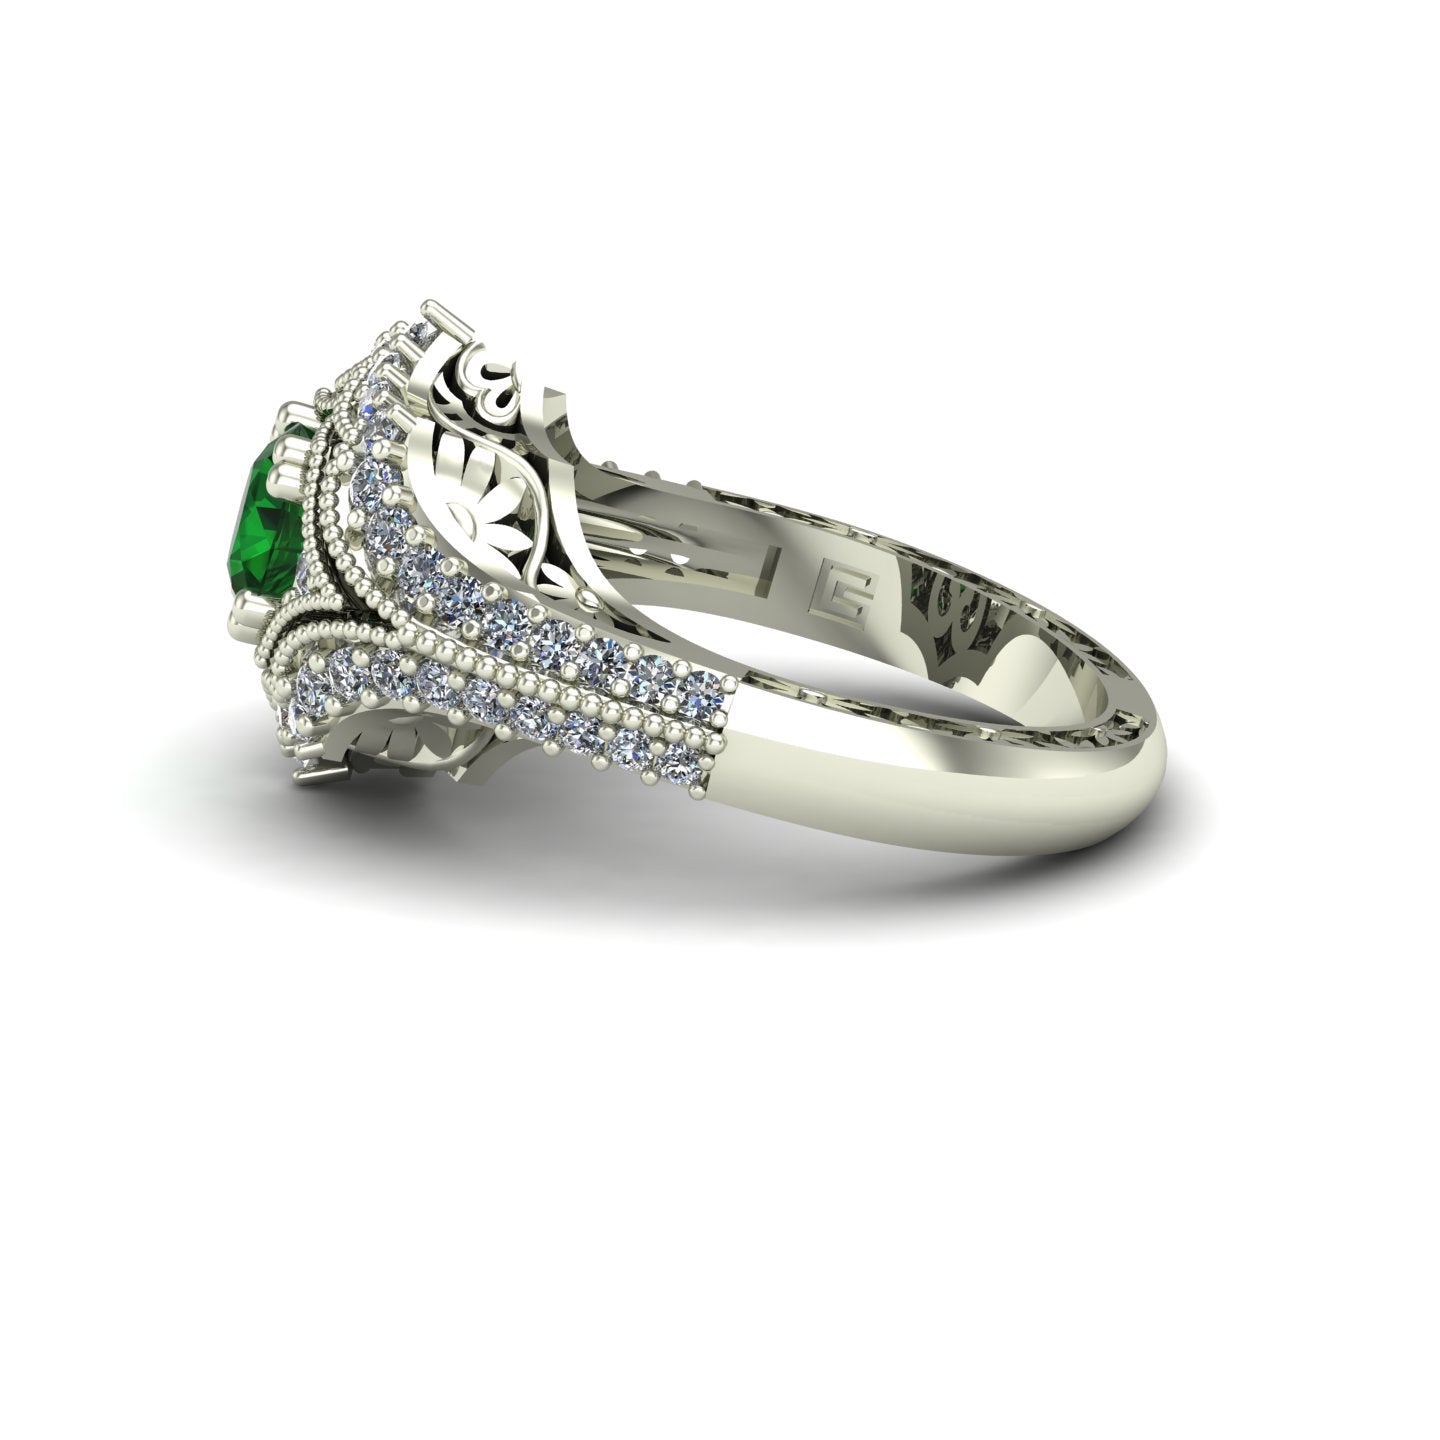 Emerald and diamond ring with floral carving in 14k white gold - Charles Babb Designs - side view